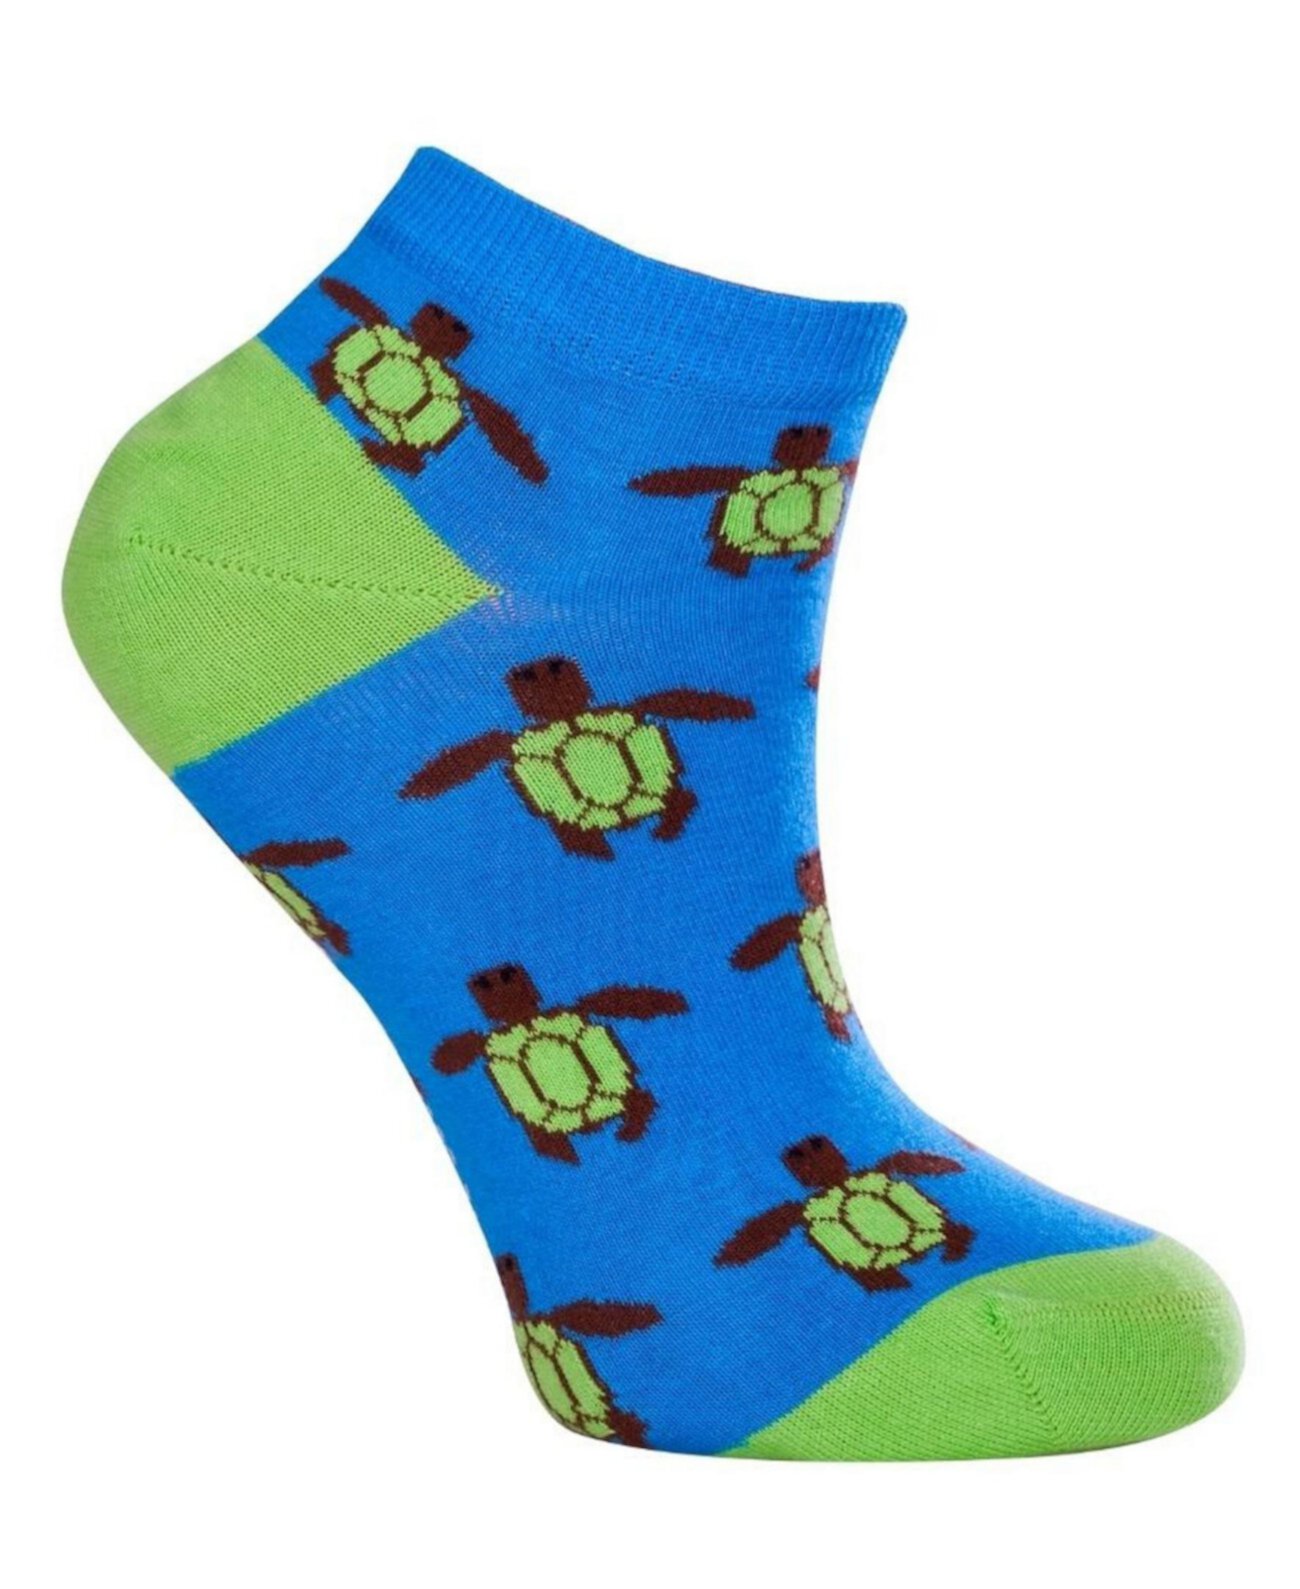 Women's Turtle W-Cotton Novelty Ankle Socks with Seamless Toe, Pack of 1 Love Sock Company